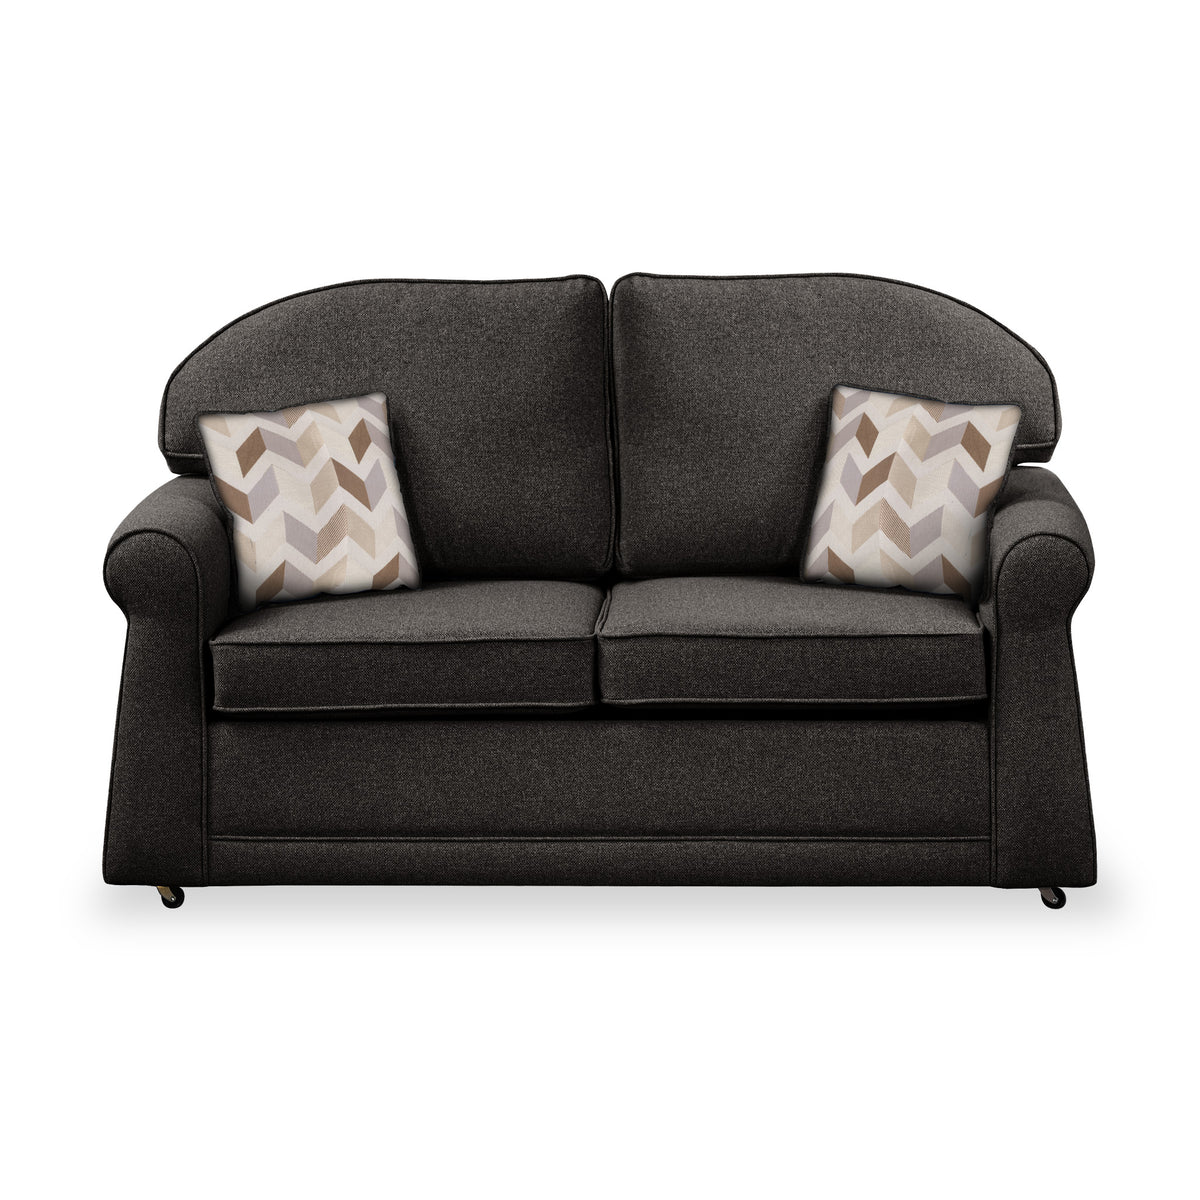 Croxdon Charcoal Faux Linen 2 Seater Sofabed with Oatmeal Scatter Cushions from Roseland Furniture